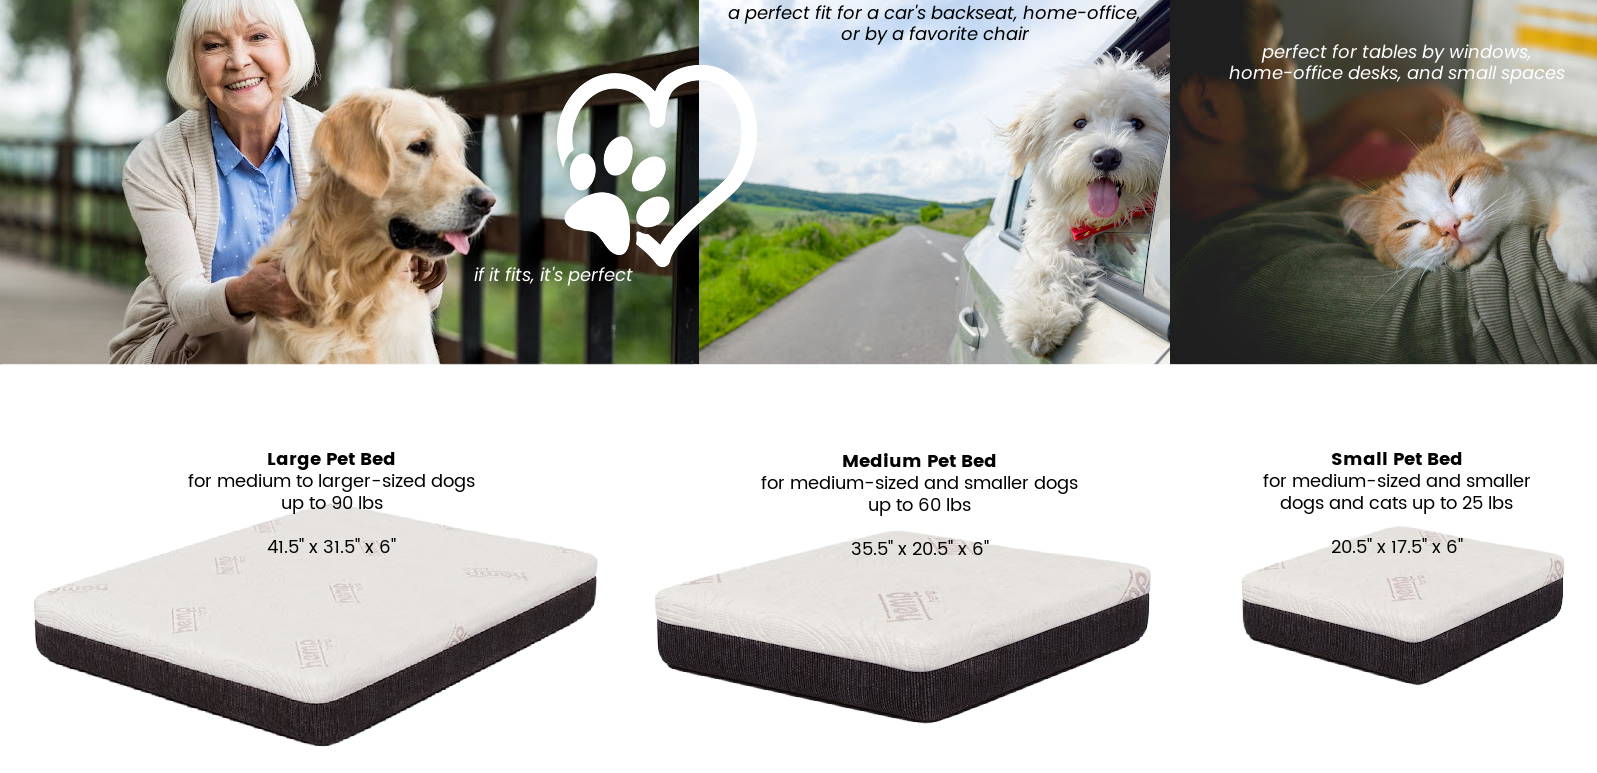 Showing large, medium and small sizes of pet beds being perfect for a car's backseat, home office, by windows, and small spaces